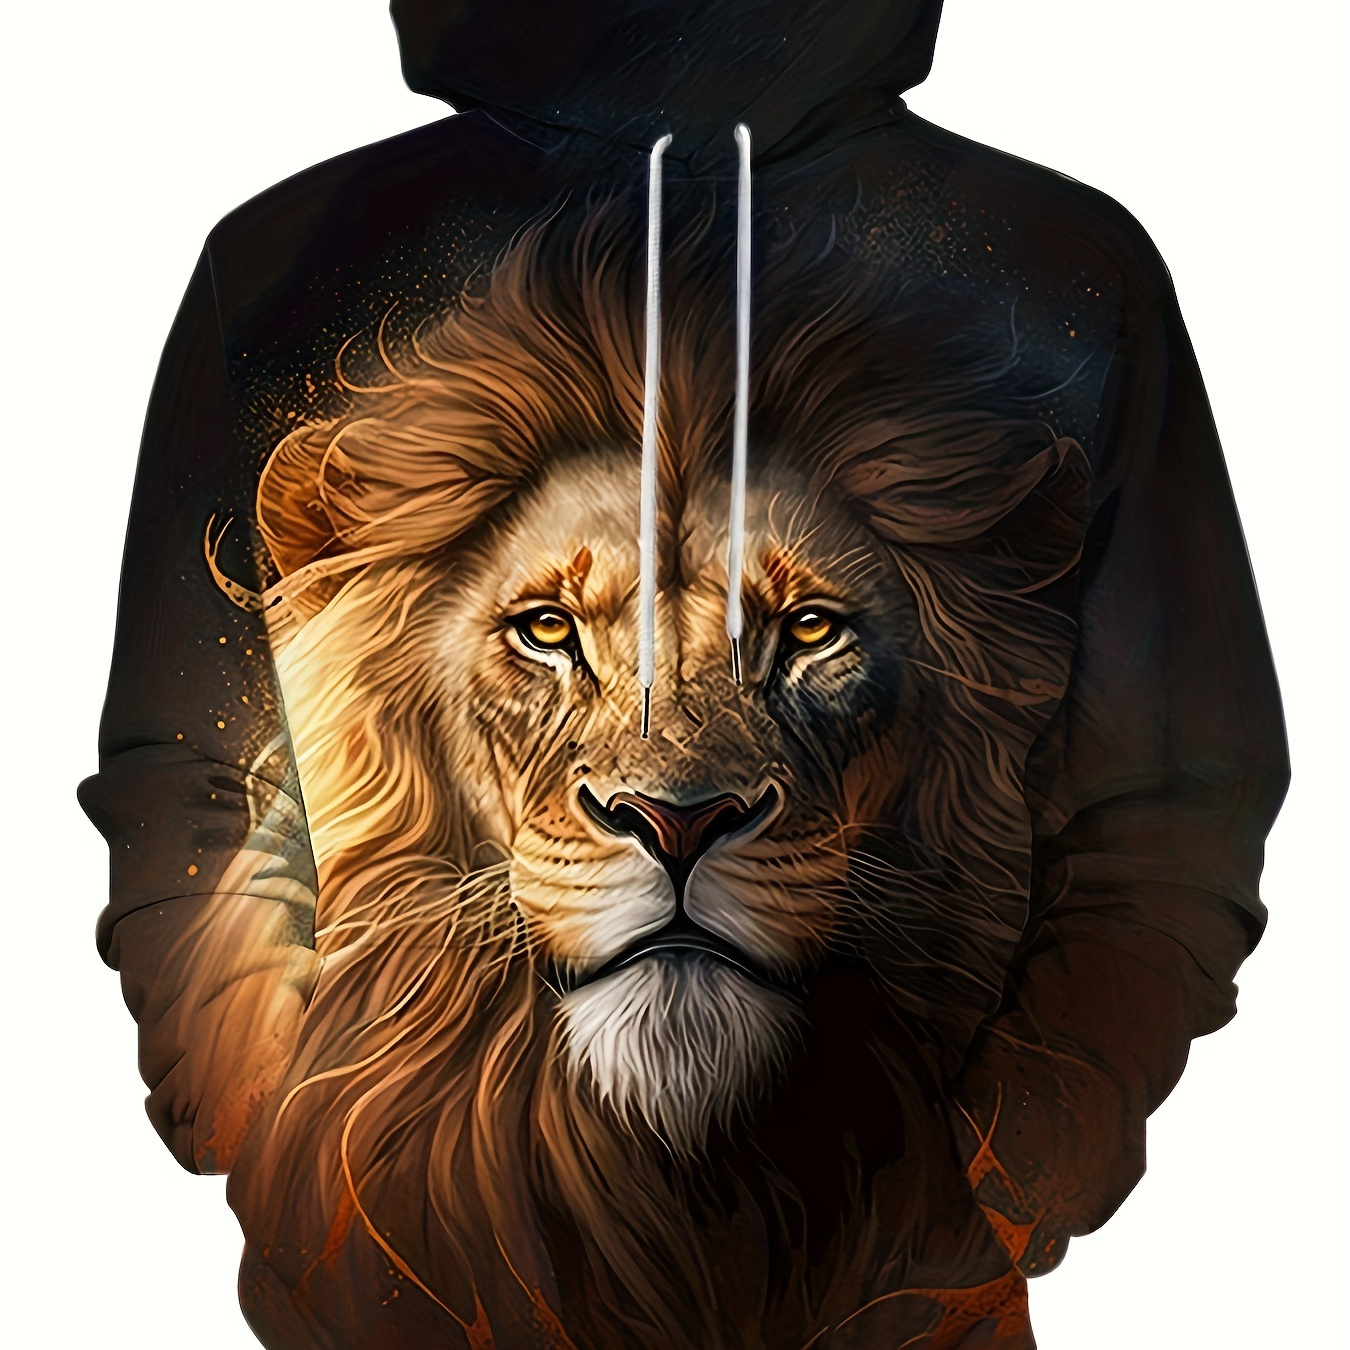 

Lion Print Hoodie, Cool Hoodies For Men, Men's Casual Graphic Design Pullover Hooded Sweatshirt With Kangaroo Pocket Streetwear For Winter Fall, As Gifts